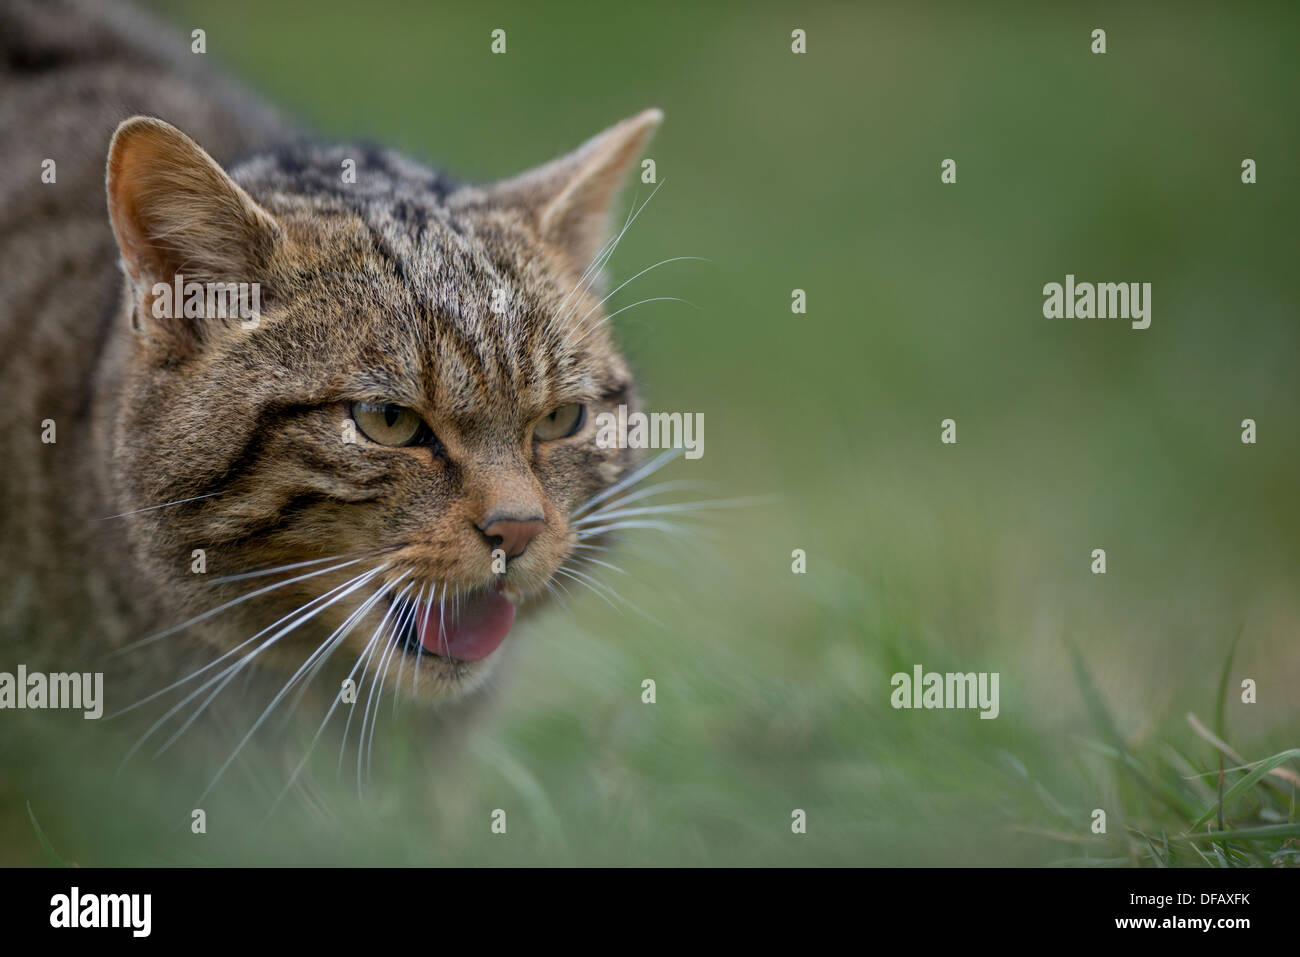 Scottish wildcat with tongue out, ready to growl Stock Photo